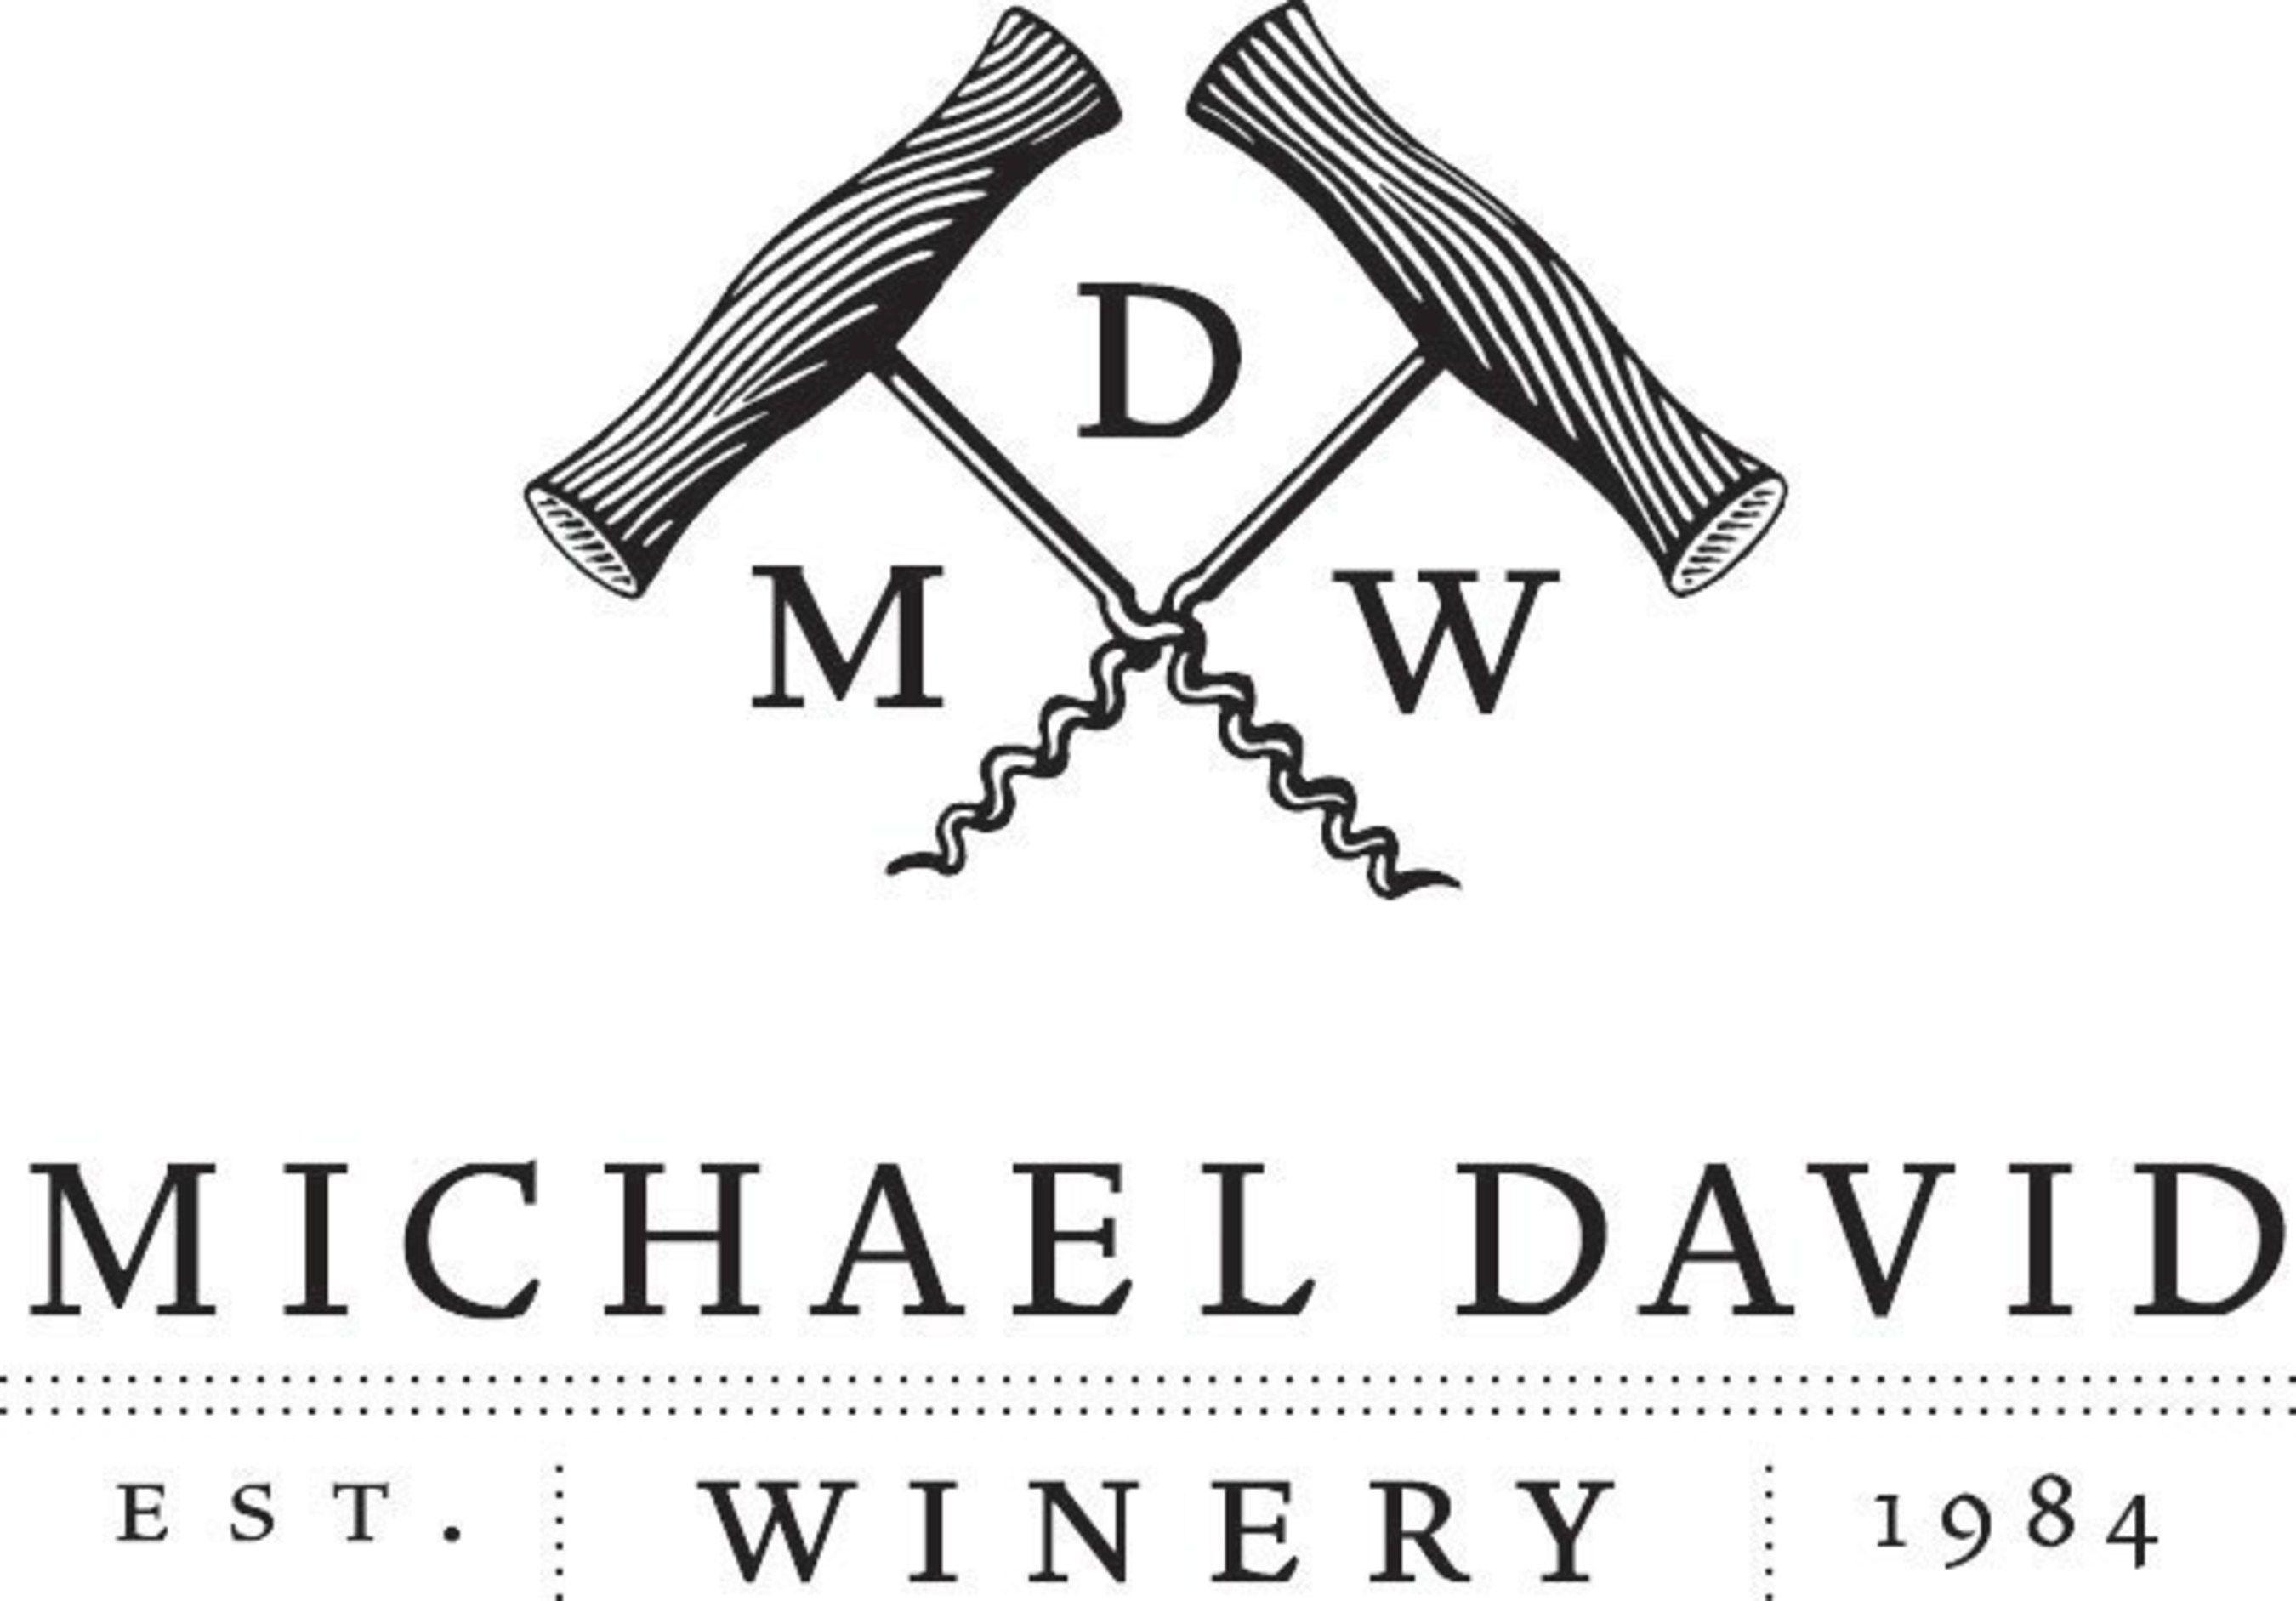 Winery Logo - Michael David Winery named Winery of the Year